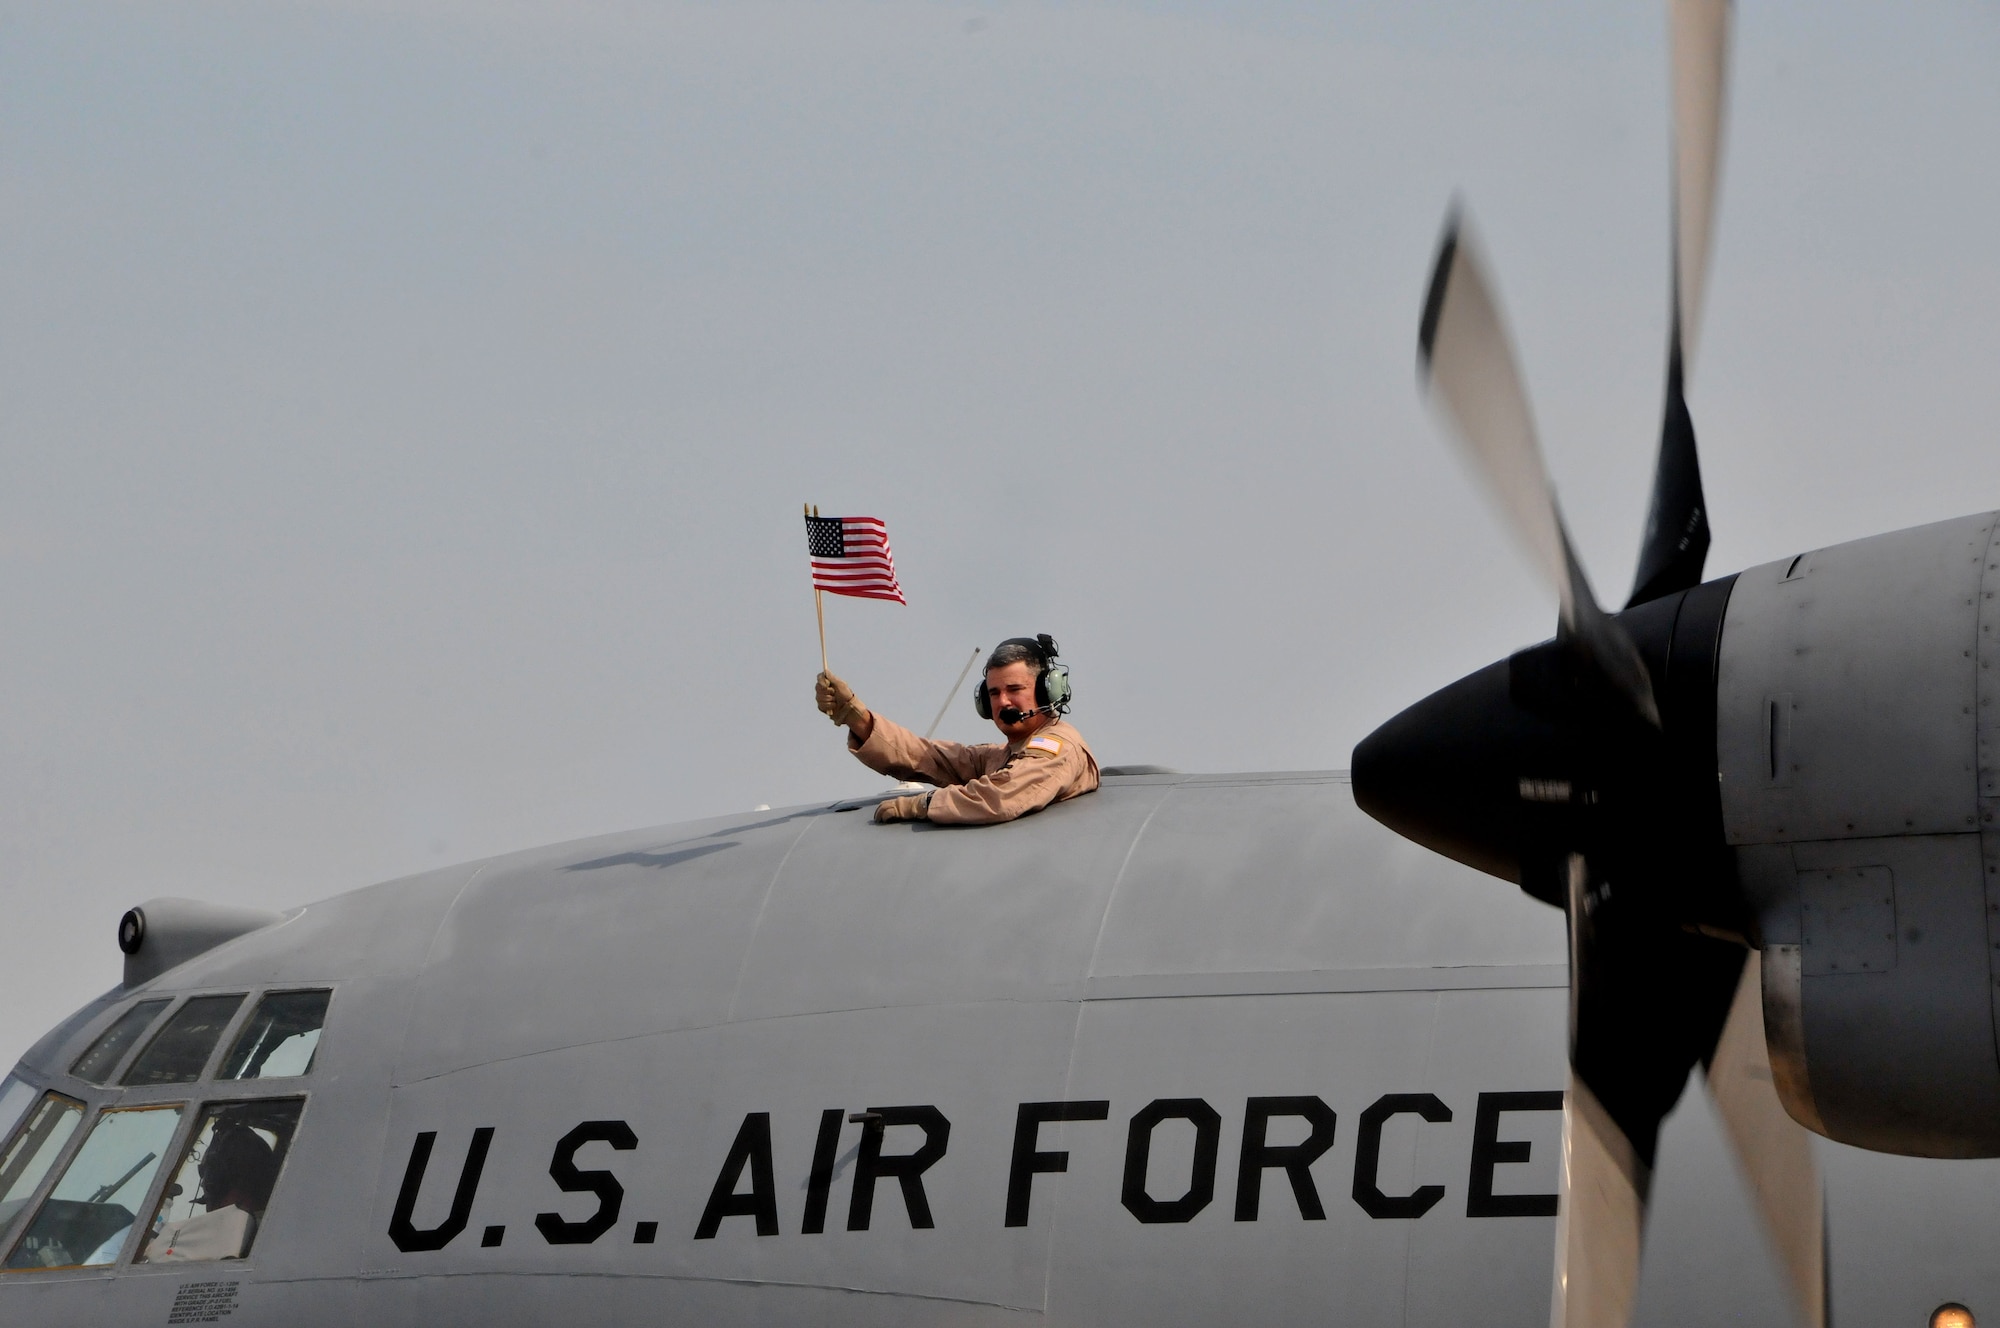 U.S. Air Force Staff Sgt. Rob Levings, Flight Engineer for the 145th Operations Support Squadron, waves an American flag, saying goodbye to family and friends as he and other airmen from the 145th Airlift Wing deploy to Southwest Asia. The C-130 Hercules aircraft departed from the North Carolina Air National Guard base, Charlotte Douglas Intl Airport, June 26, 2014. (U.S. Air National Guard photo by Master Sgt. Patricia F. Moran, 145th Public Affairs/Released) 
